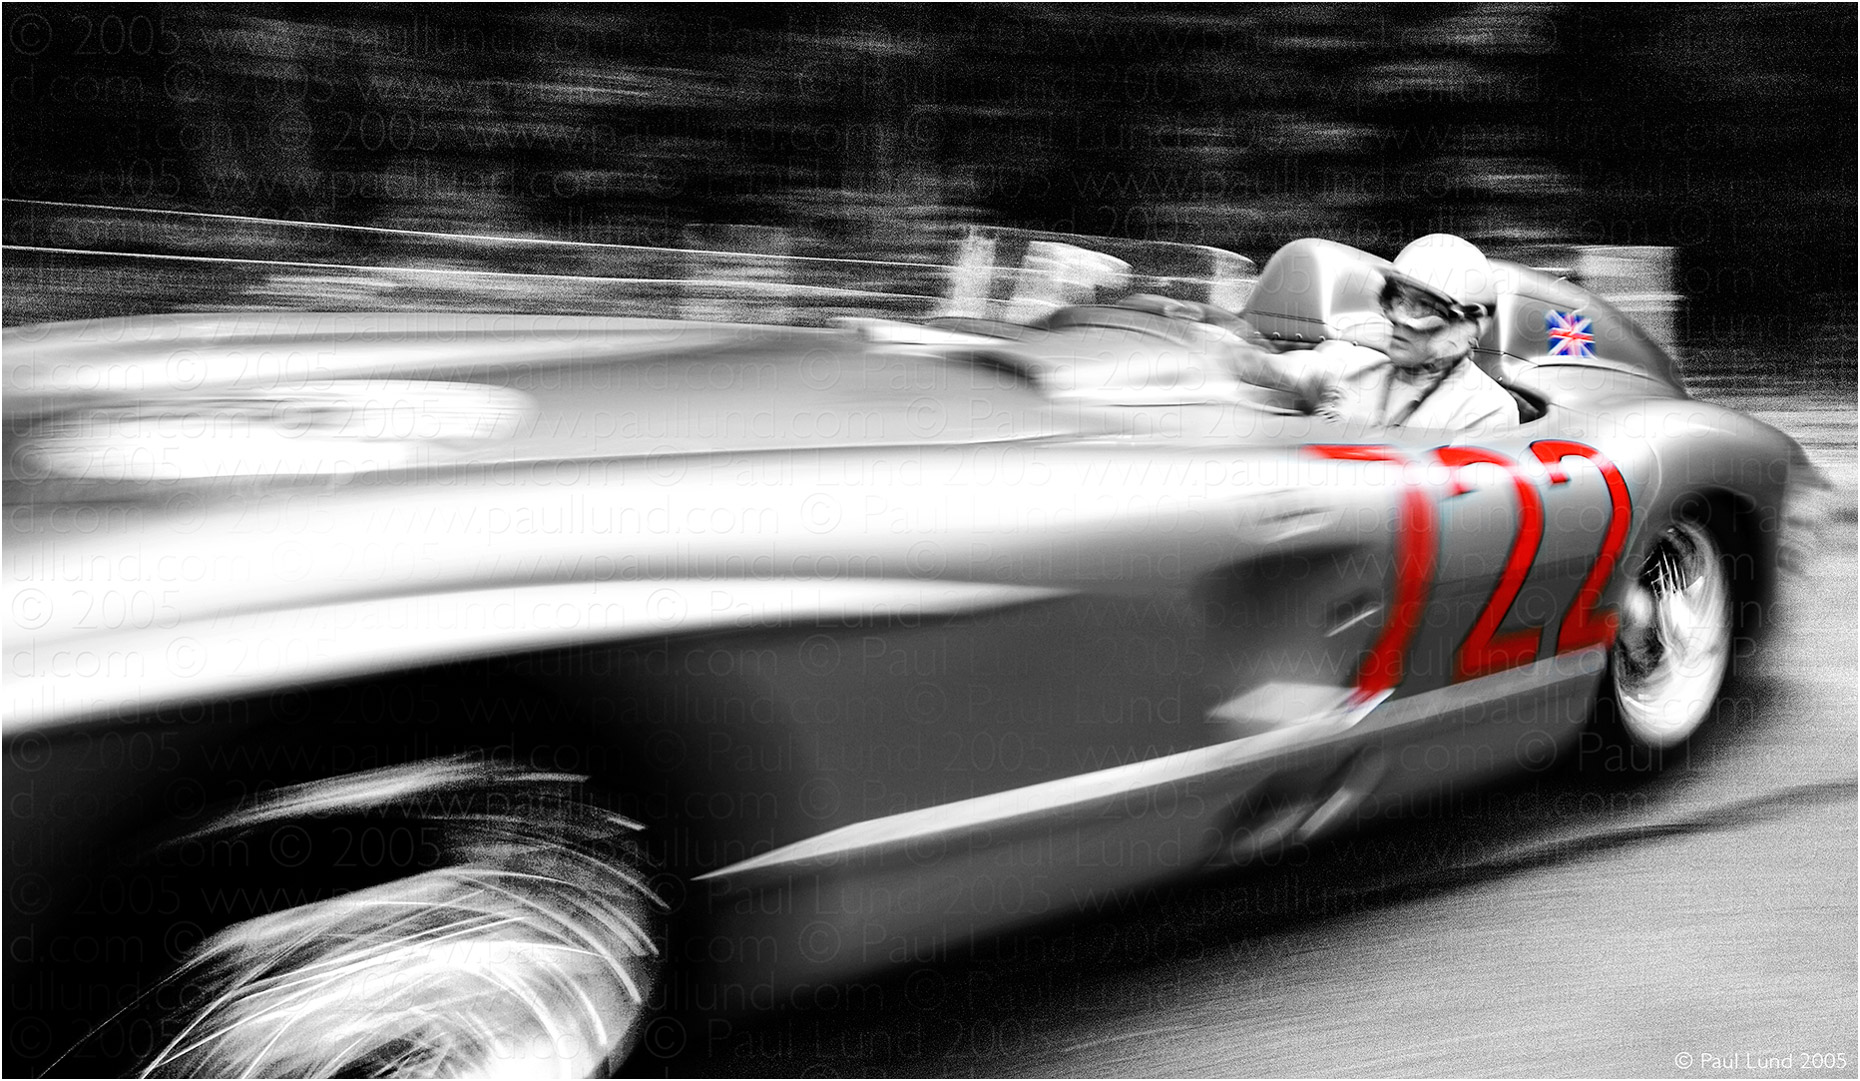 Sir Stirling Moss in his 1955 Mille Miglia winning Silver Arrows Mercedes Benz 300 SLR at The Goodwood Festival of Speed 2005. Photographer: Paul Lund